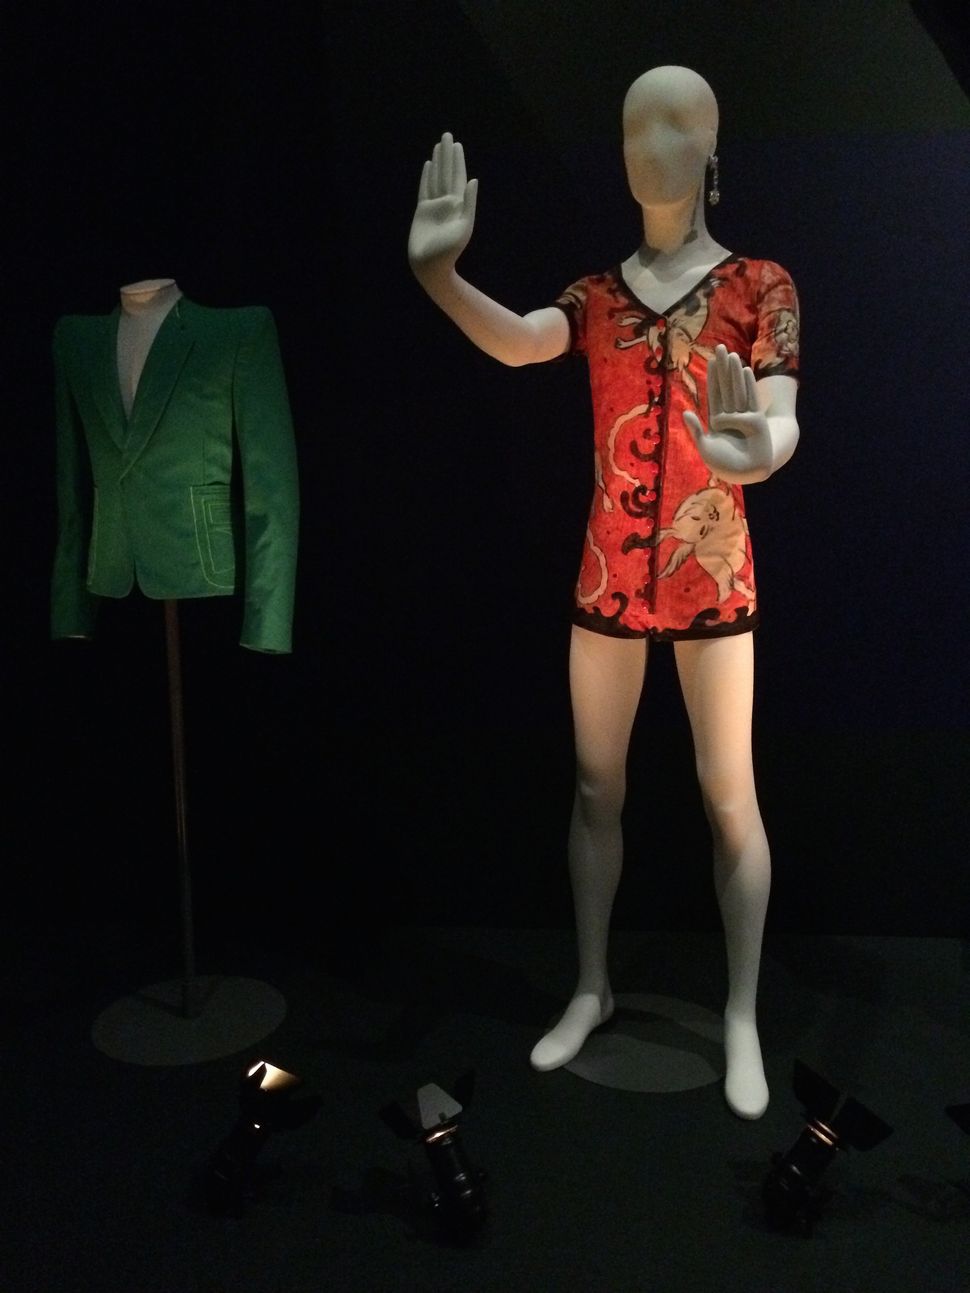 David Bowie Exhibition Details How An Artist Became An Icon | HuffPost